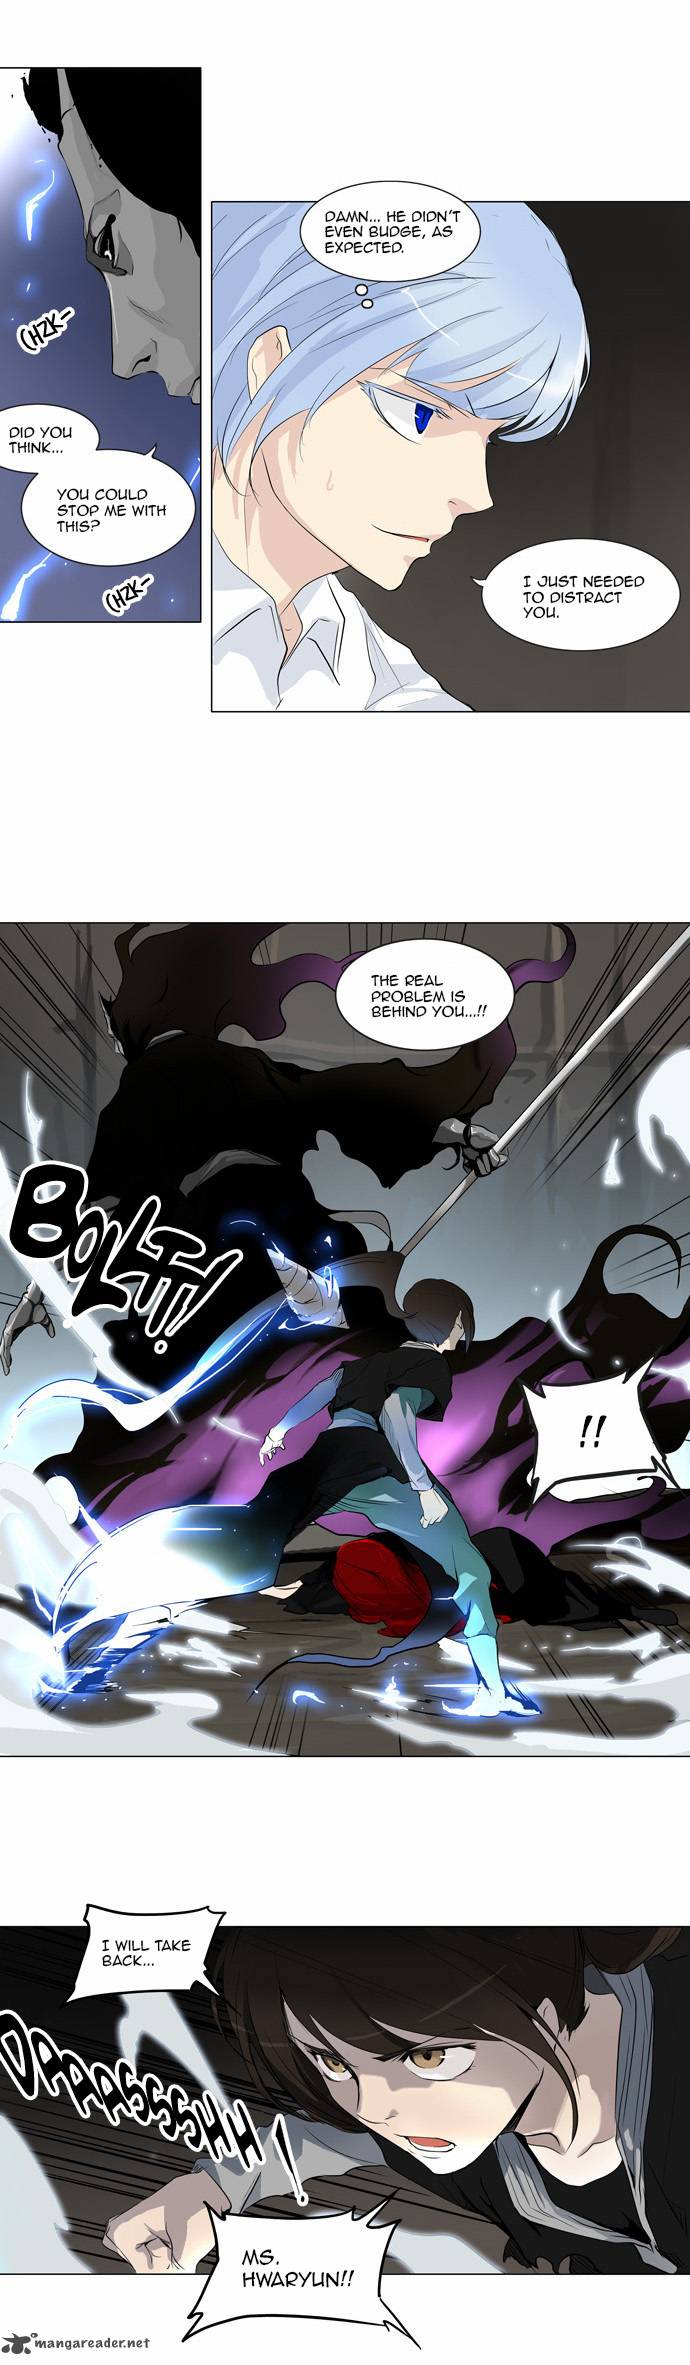 Tower Of God 180 19